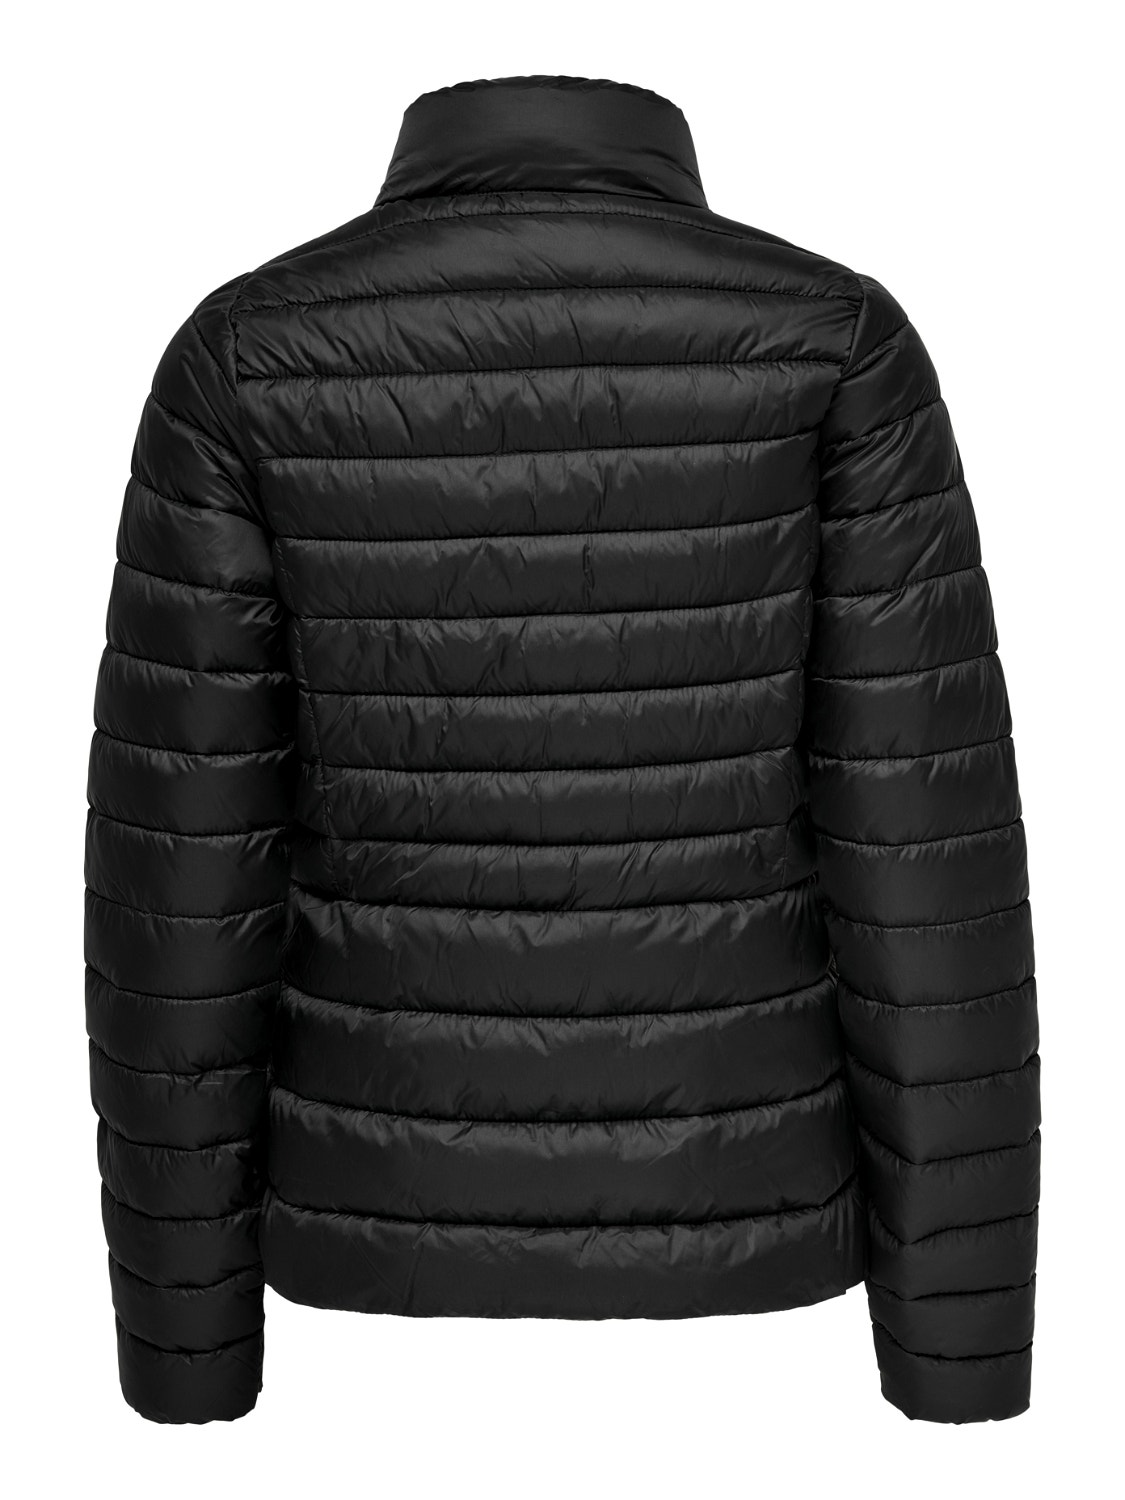 ONLY Tall Padded Jacket -Black - 15258450